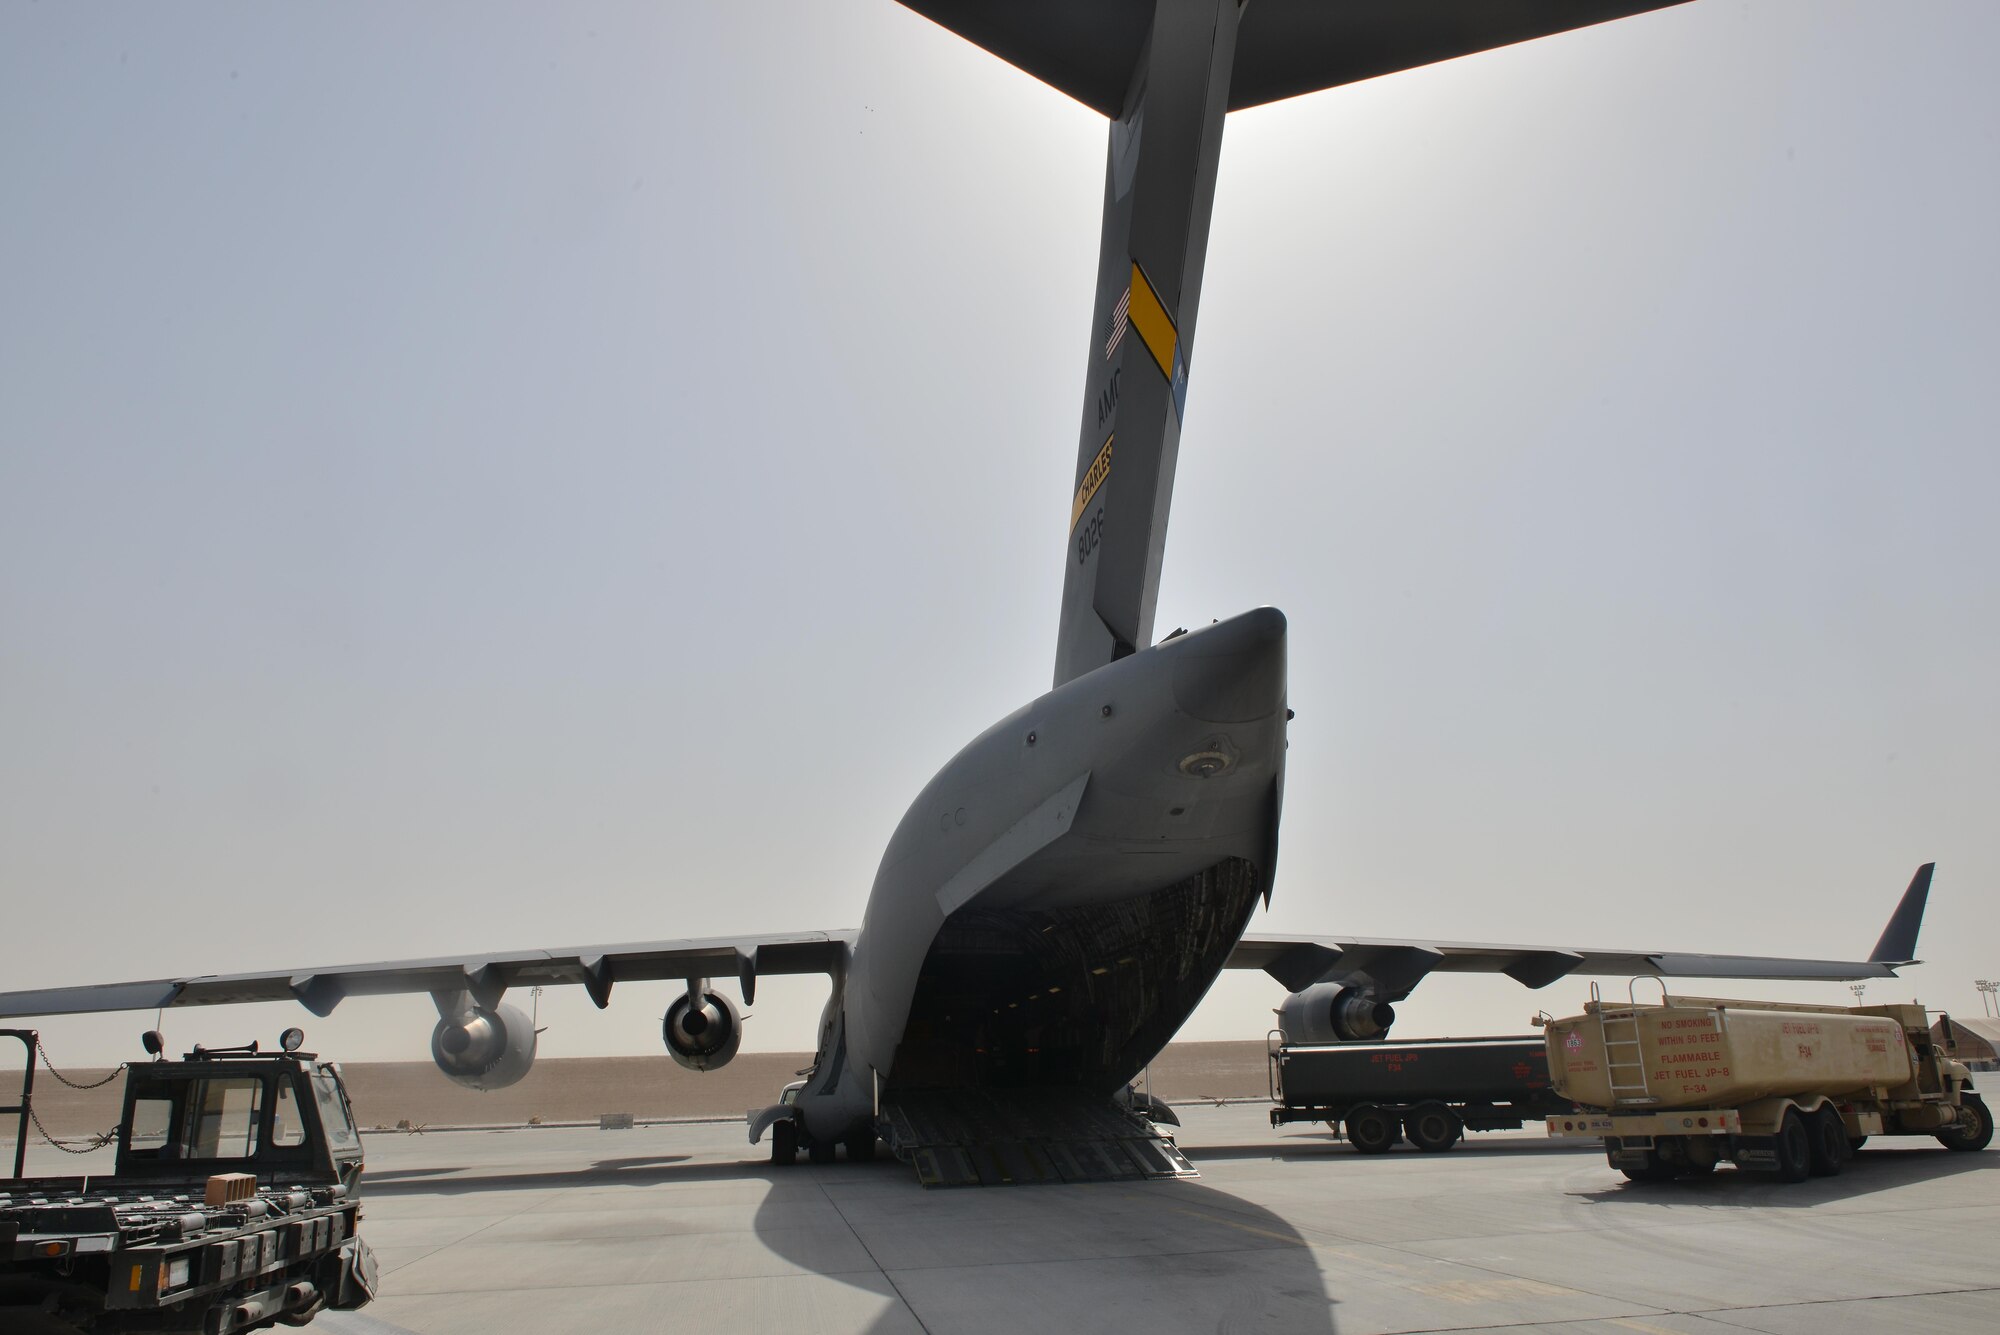 A C-17 Globemaster aircraft assigned to the 437th Air Lift Wing, Joint base Charleston, South Carolina, is being fueled and prepared to be load with equipment to support RED HORSE Civil Engineering operations to repair a runway in Southwest Asia May 13, 2015 at Al Udeid Air Base, Qatar. (U.S. Air Force photo/Staff Sgt. Alexandre Montes)